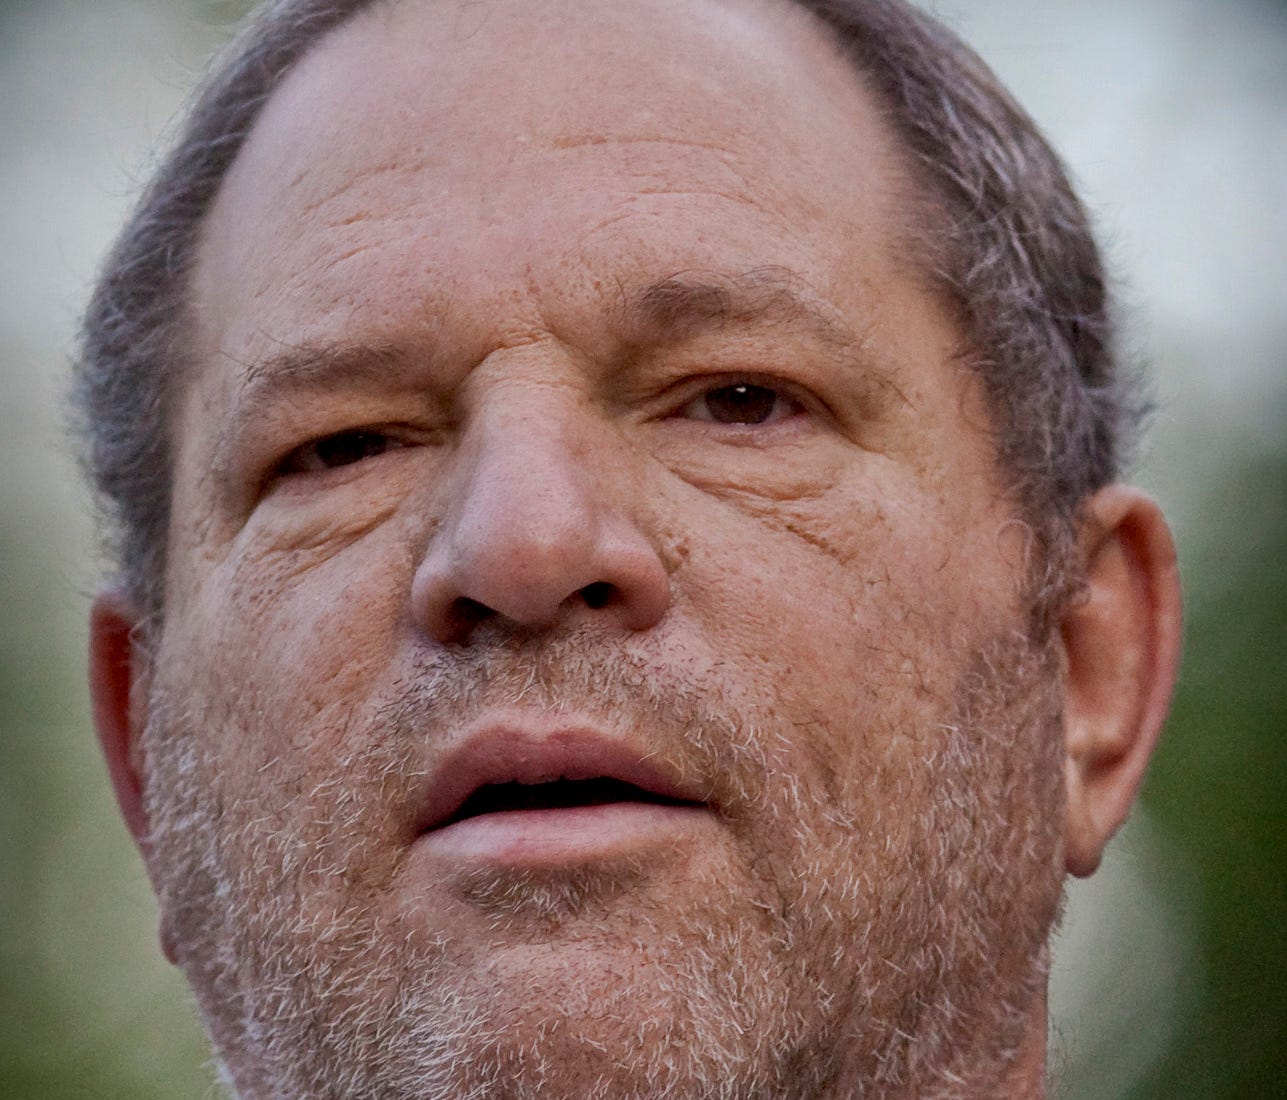 A 'New York Times' report details new revelations about how Harvey Weinstein kept his colleagues quiet.